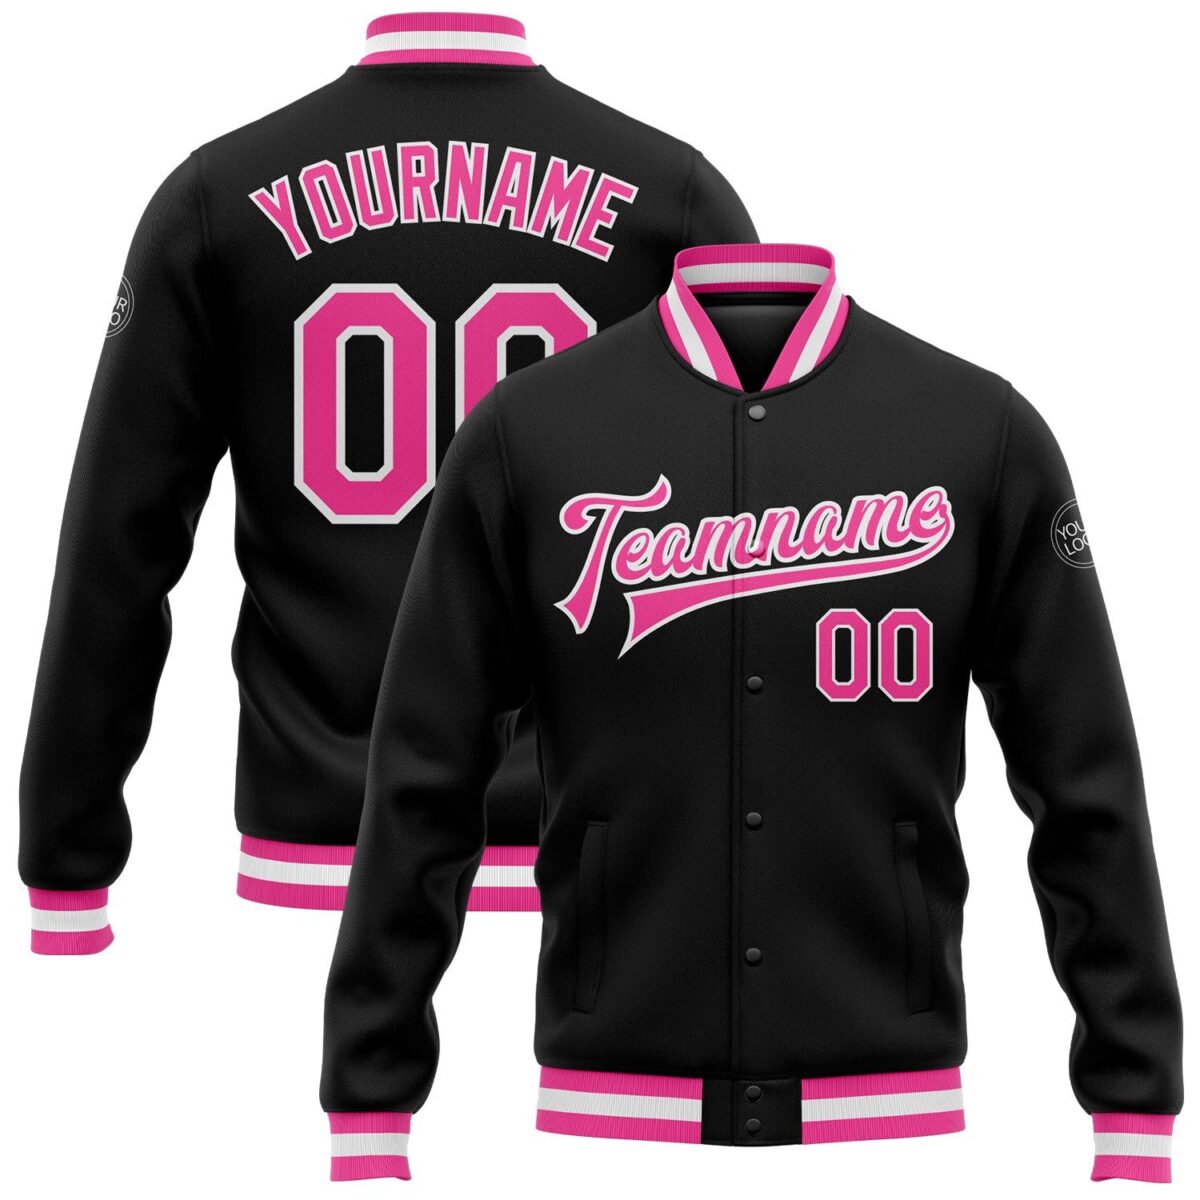 Baseball College Sports Jackets with Black 1